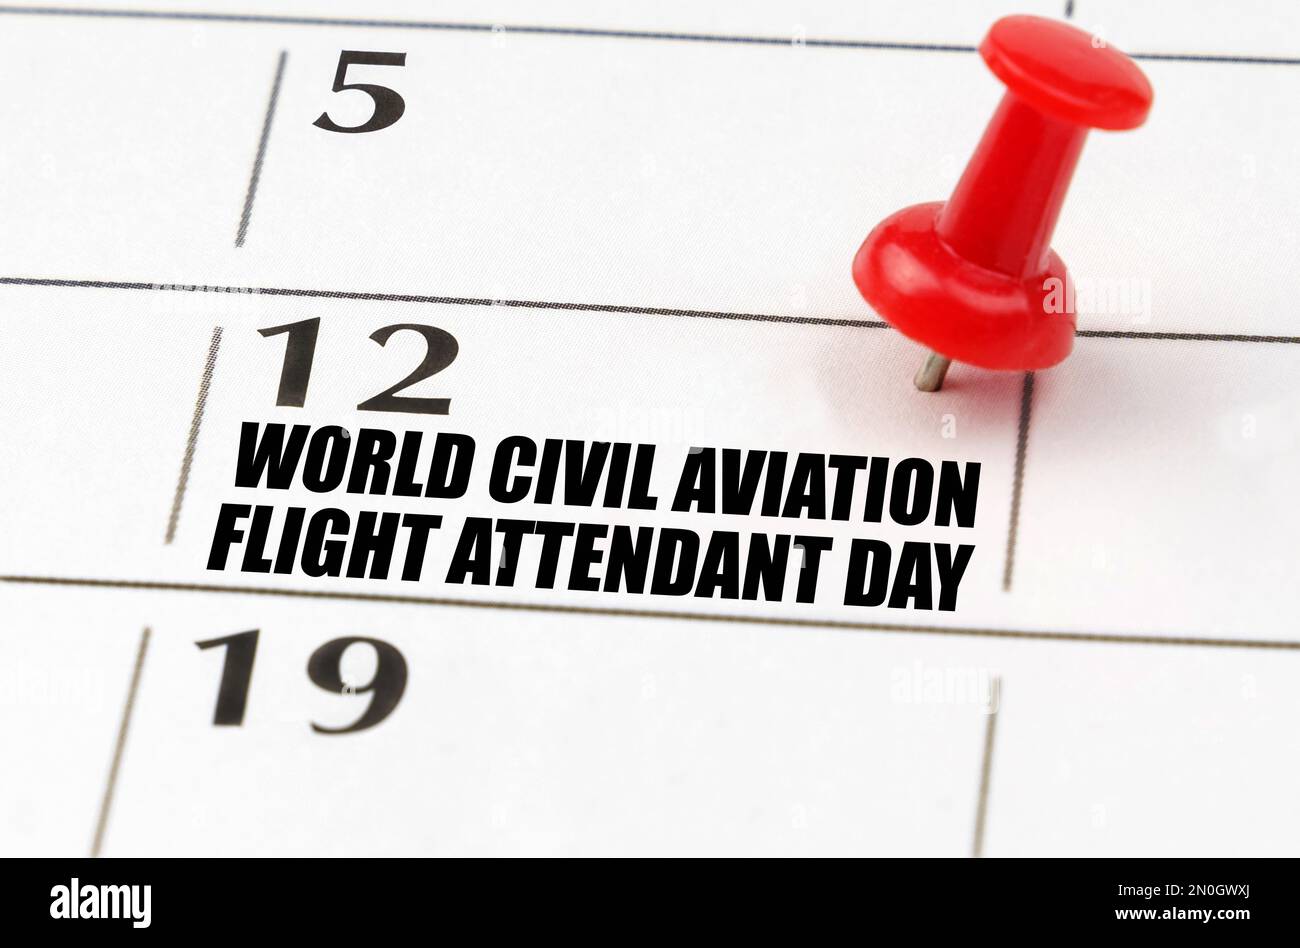 International holidays. On the calendar grid, the date and name of the holiday - July 12 - World Civil Aviation Flight Attendant Day Stock Photo